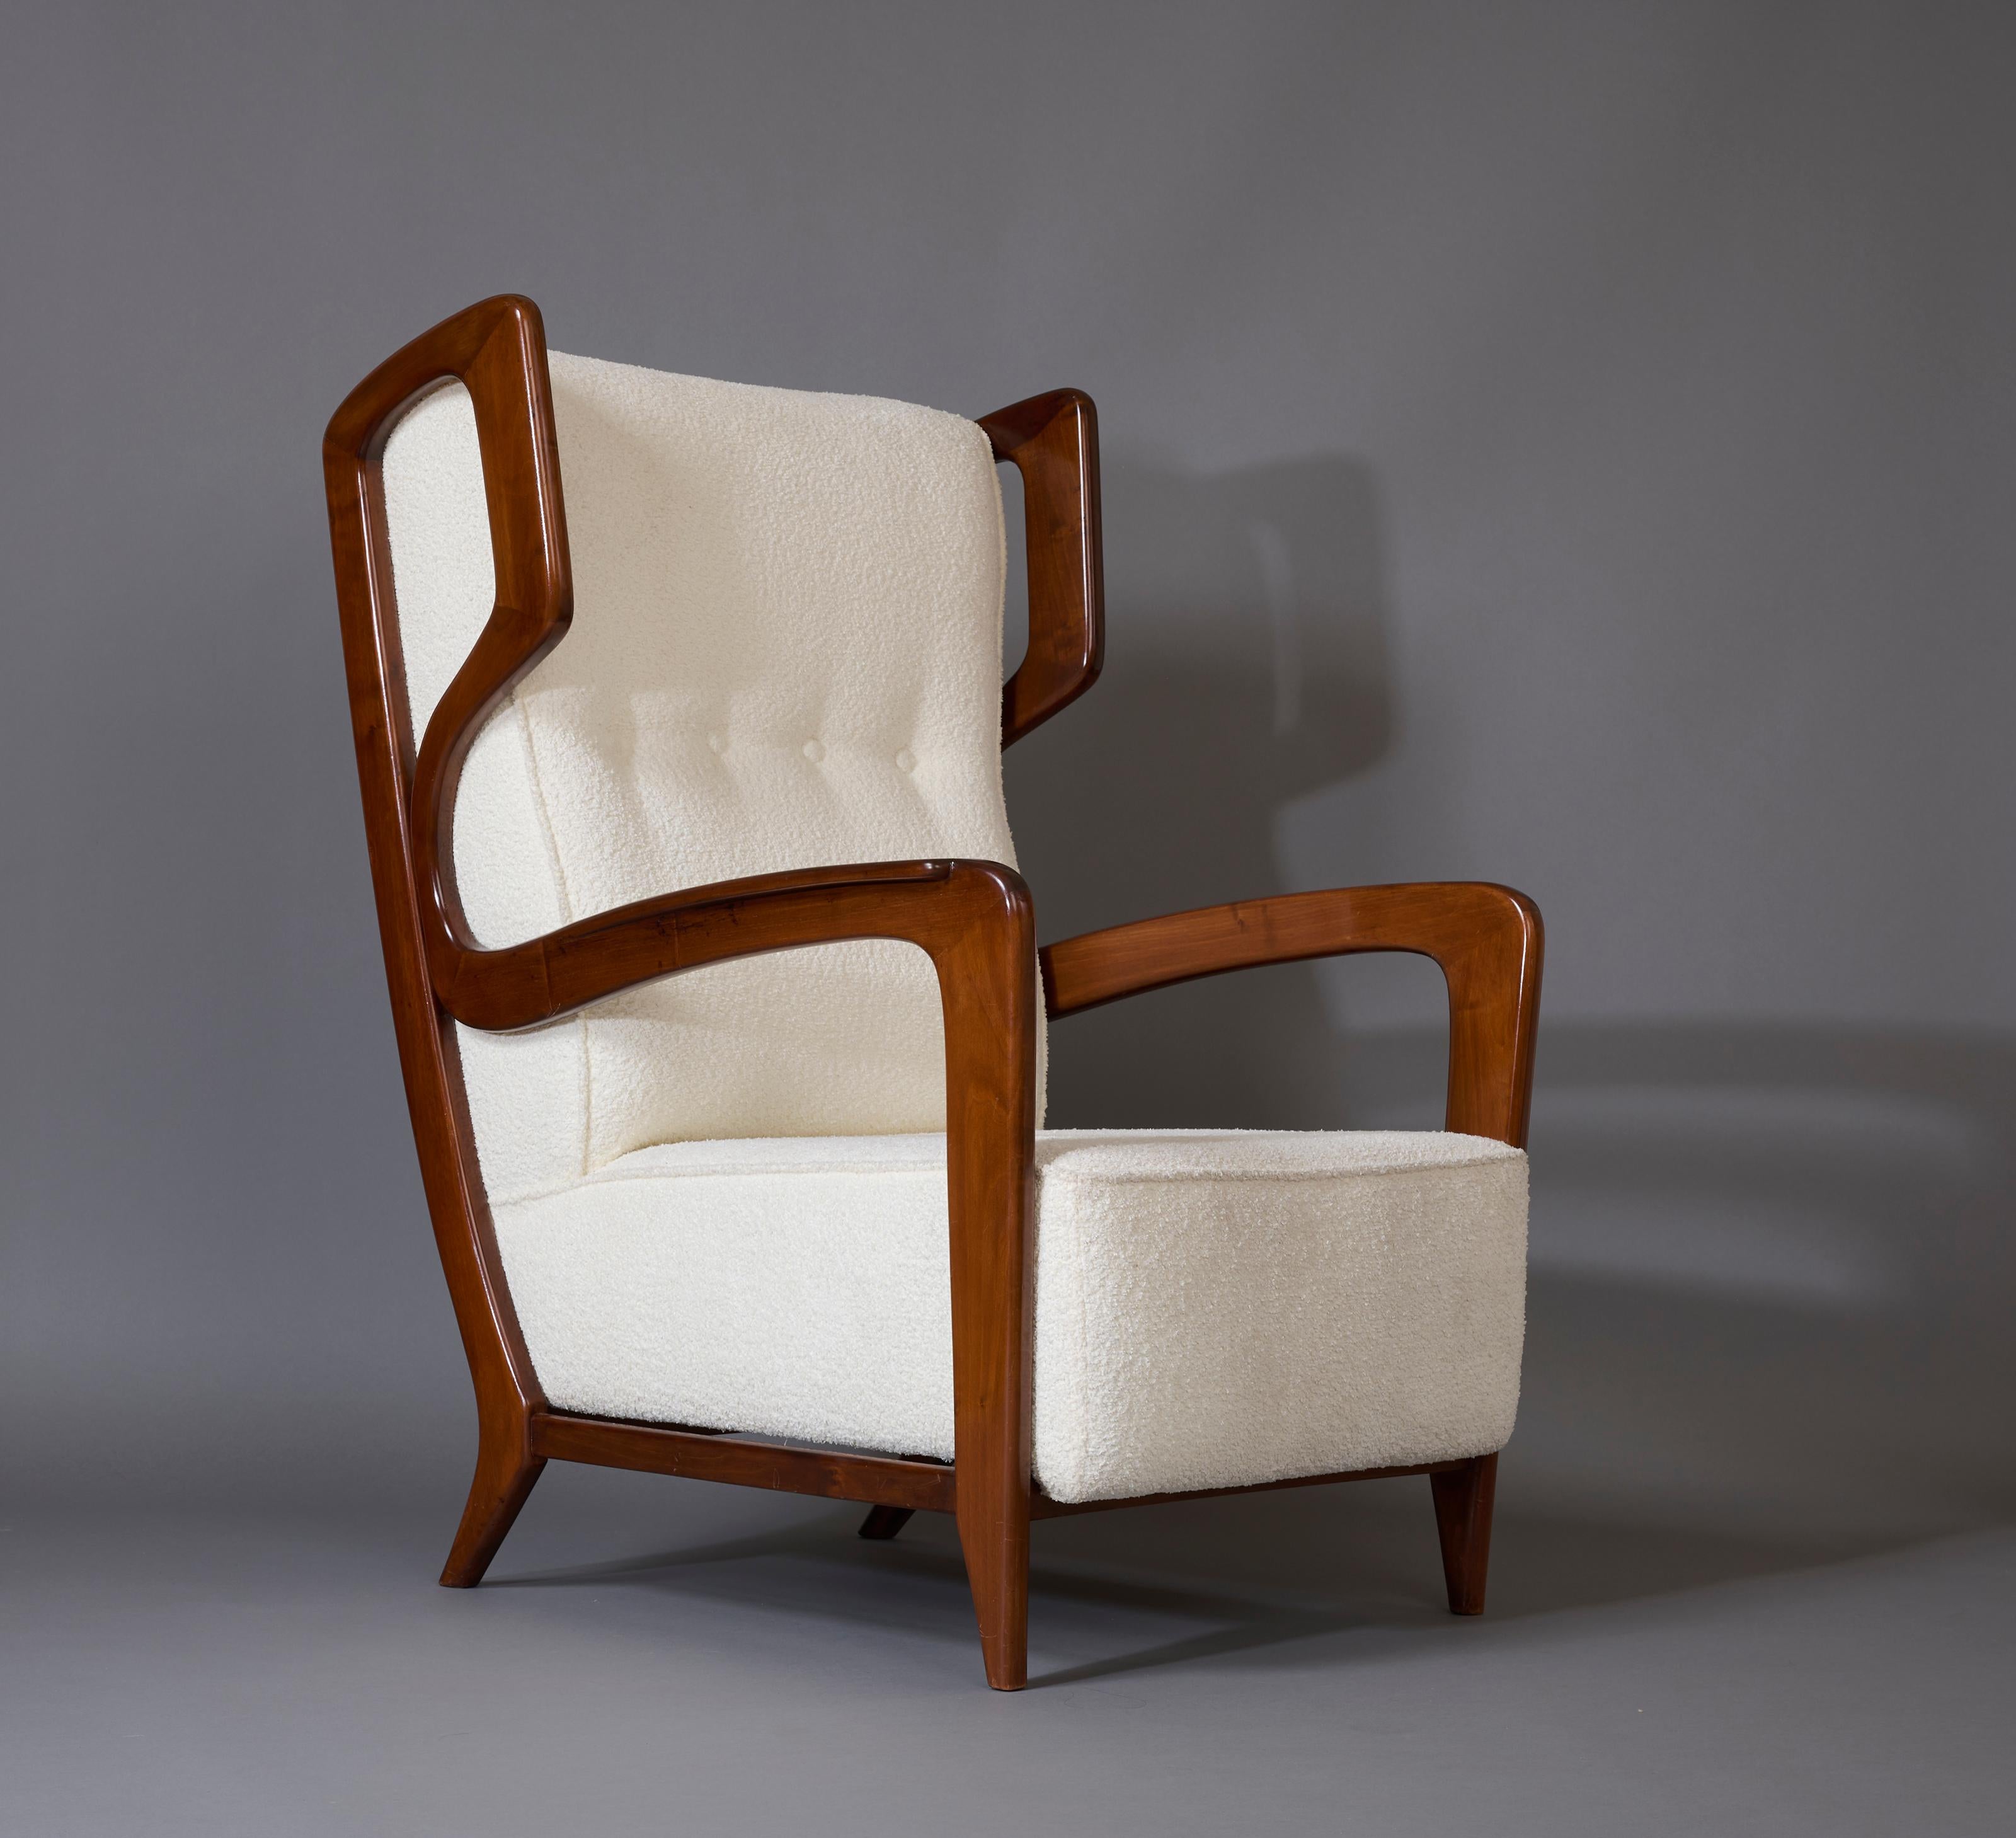 Gio Ponti, Exceptional Pair of Rare Wingback Armchairs in Walnut, Italy, 1940s For Sale 2